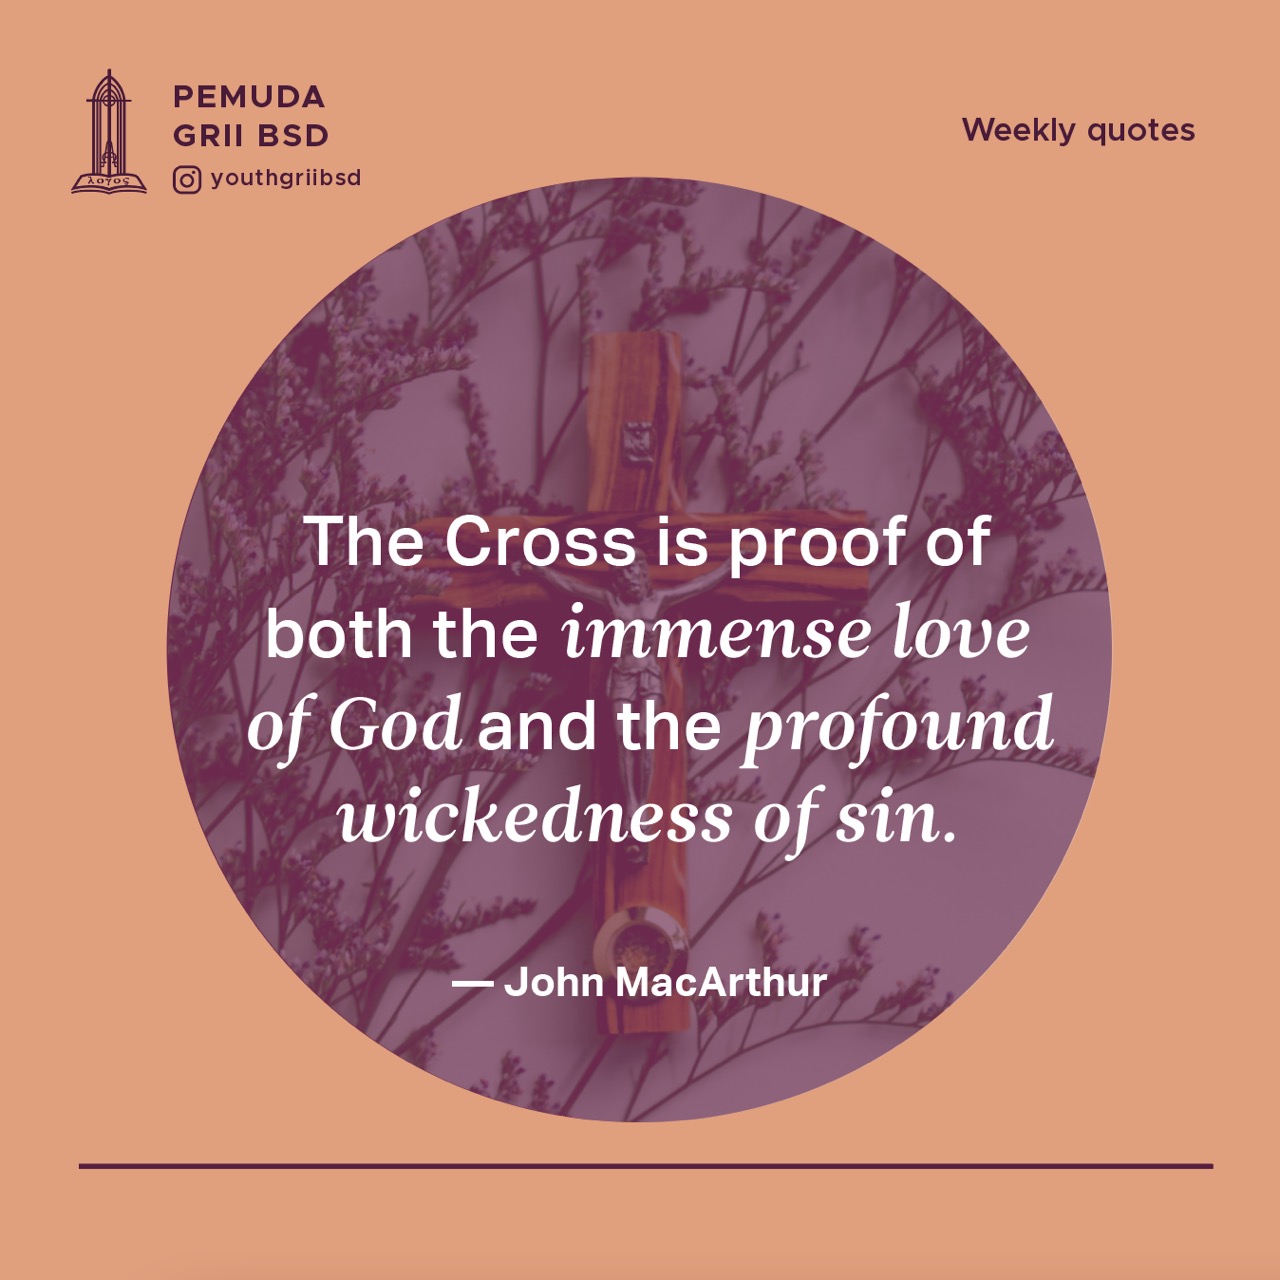 The Cross is proof of both the immense love of God and the profound wickedness of sin.